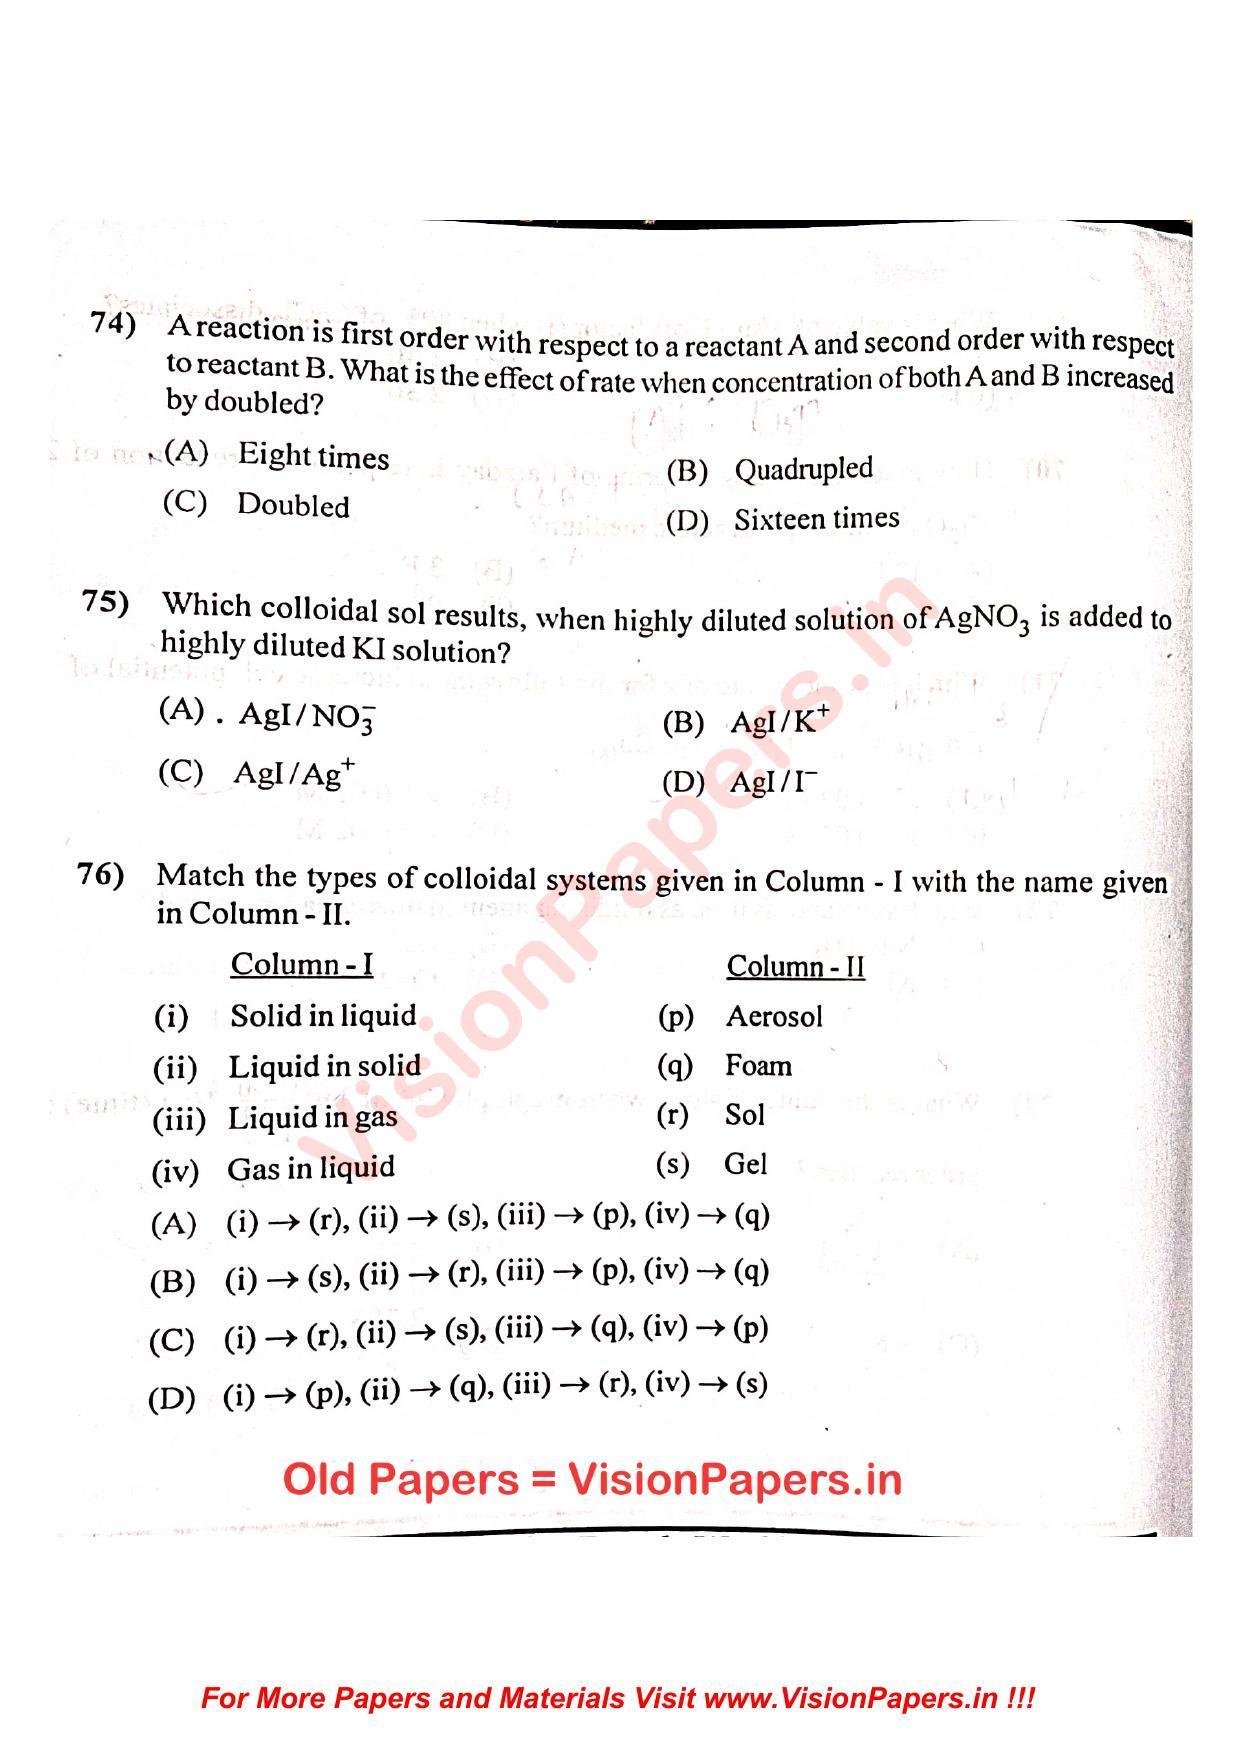 GUJCET Physics 2022 Question Paper - Page 23